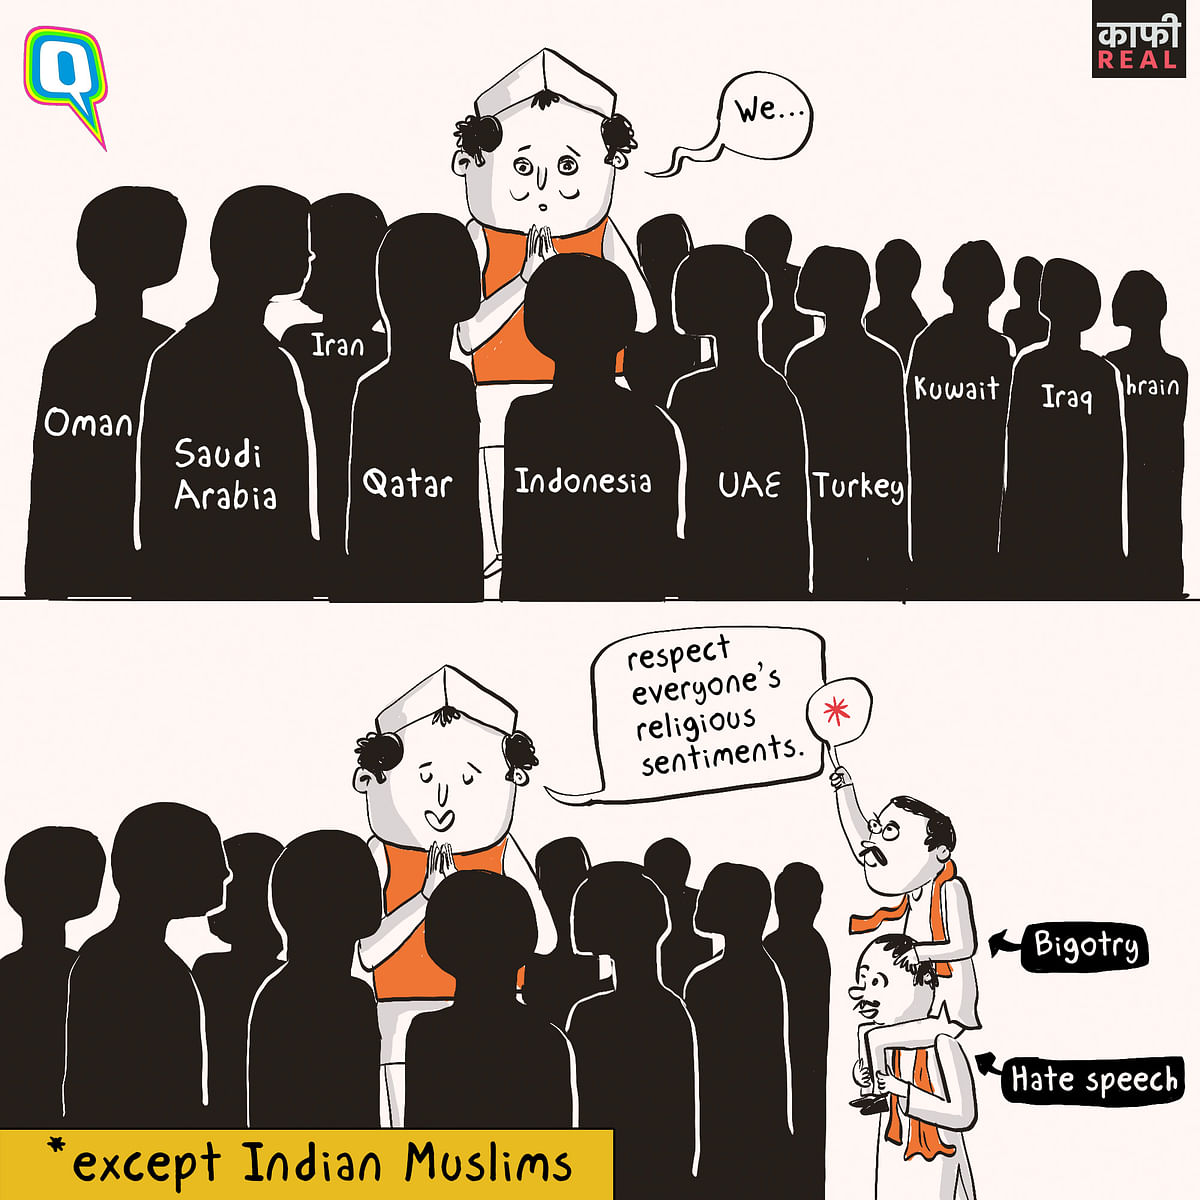 A Kaafi Real cartoon by The Quint that asks, "So, whose sentiments is it about anyway?"